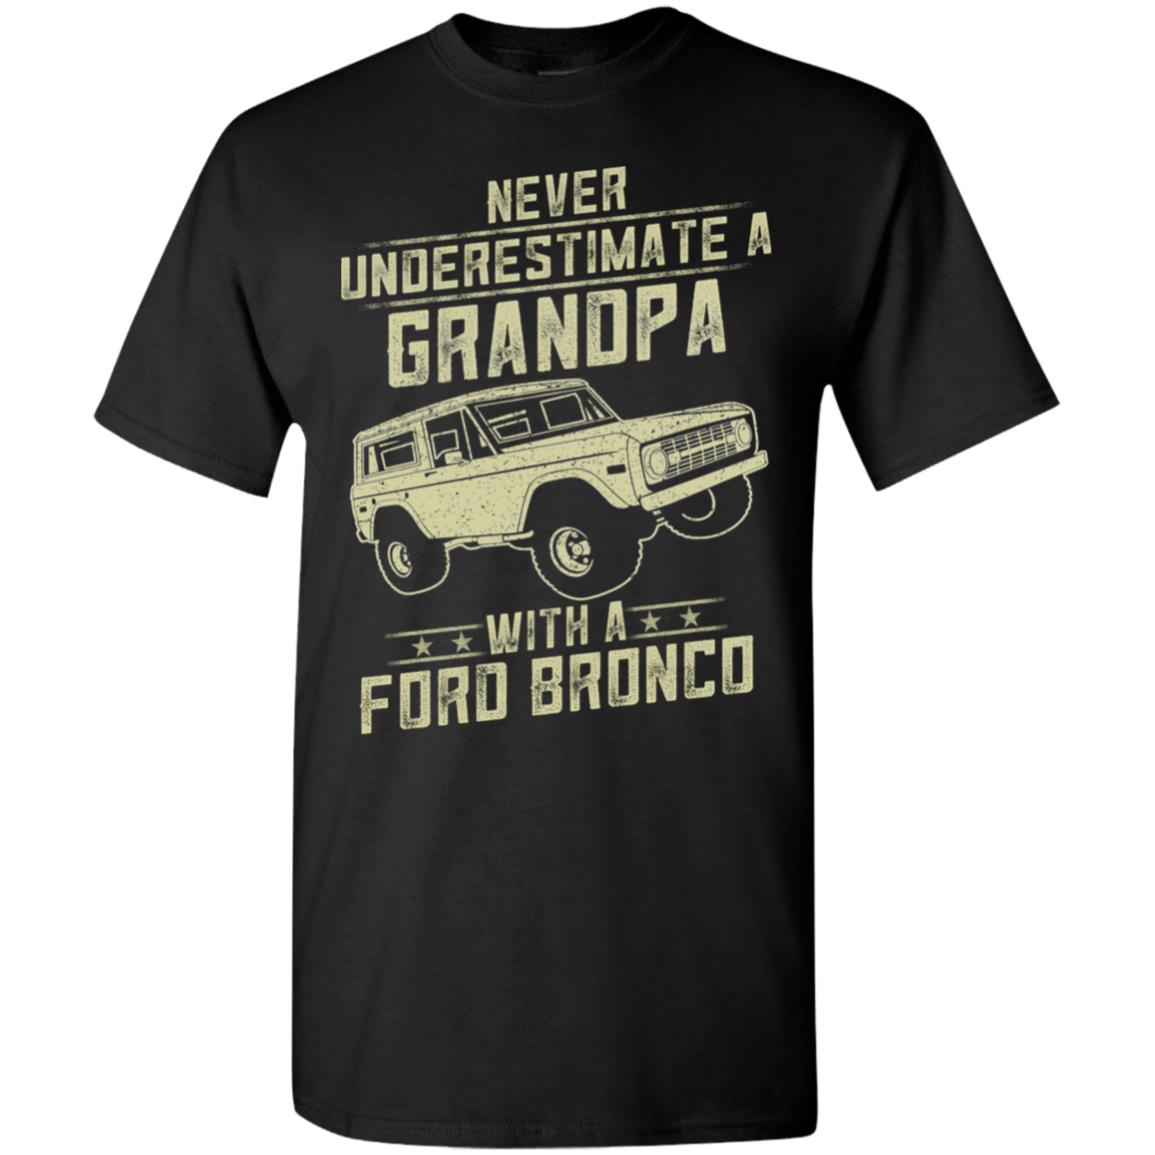 ford bronco lover gift never underestimate a grandpa old man with vintage awesome cars t shirt amzprimeshirt ford bronco lover gift never underestimate a grandpa old man with vintage awesome cars t shirt